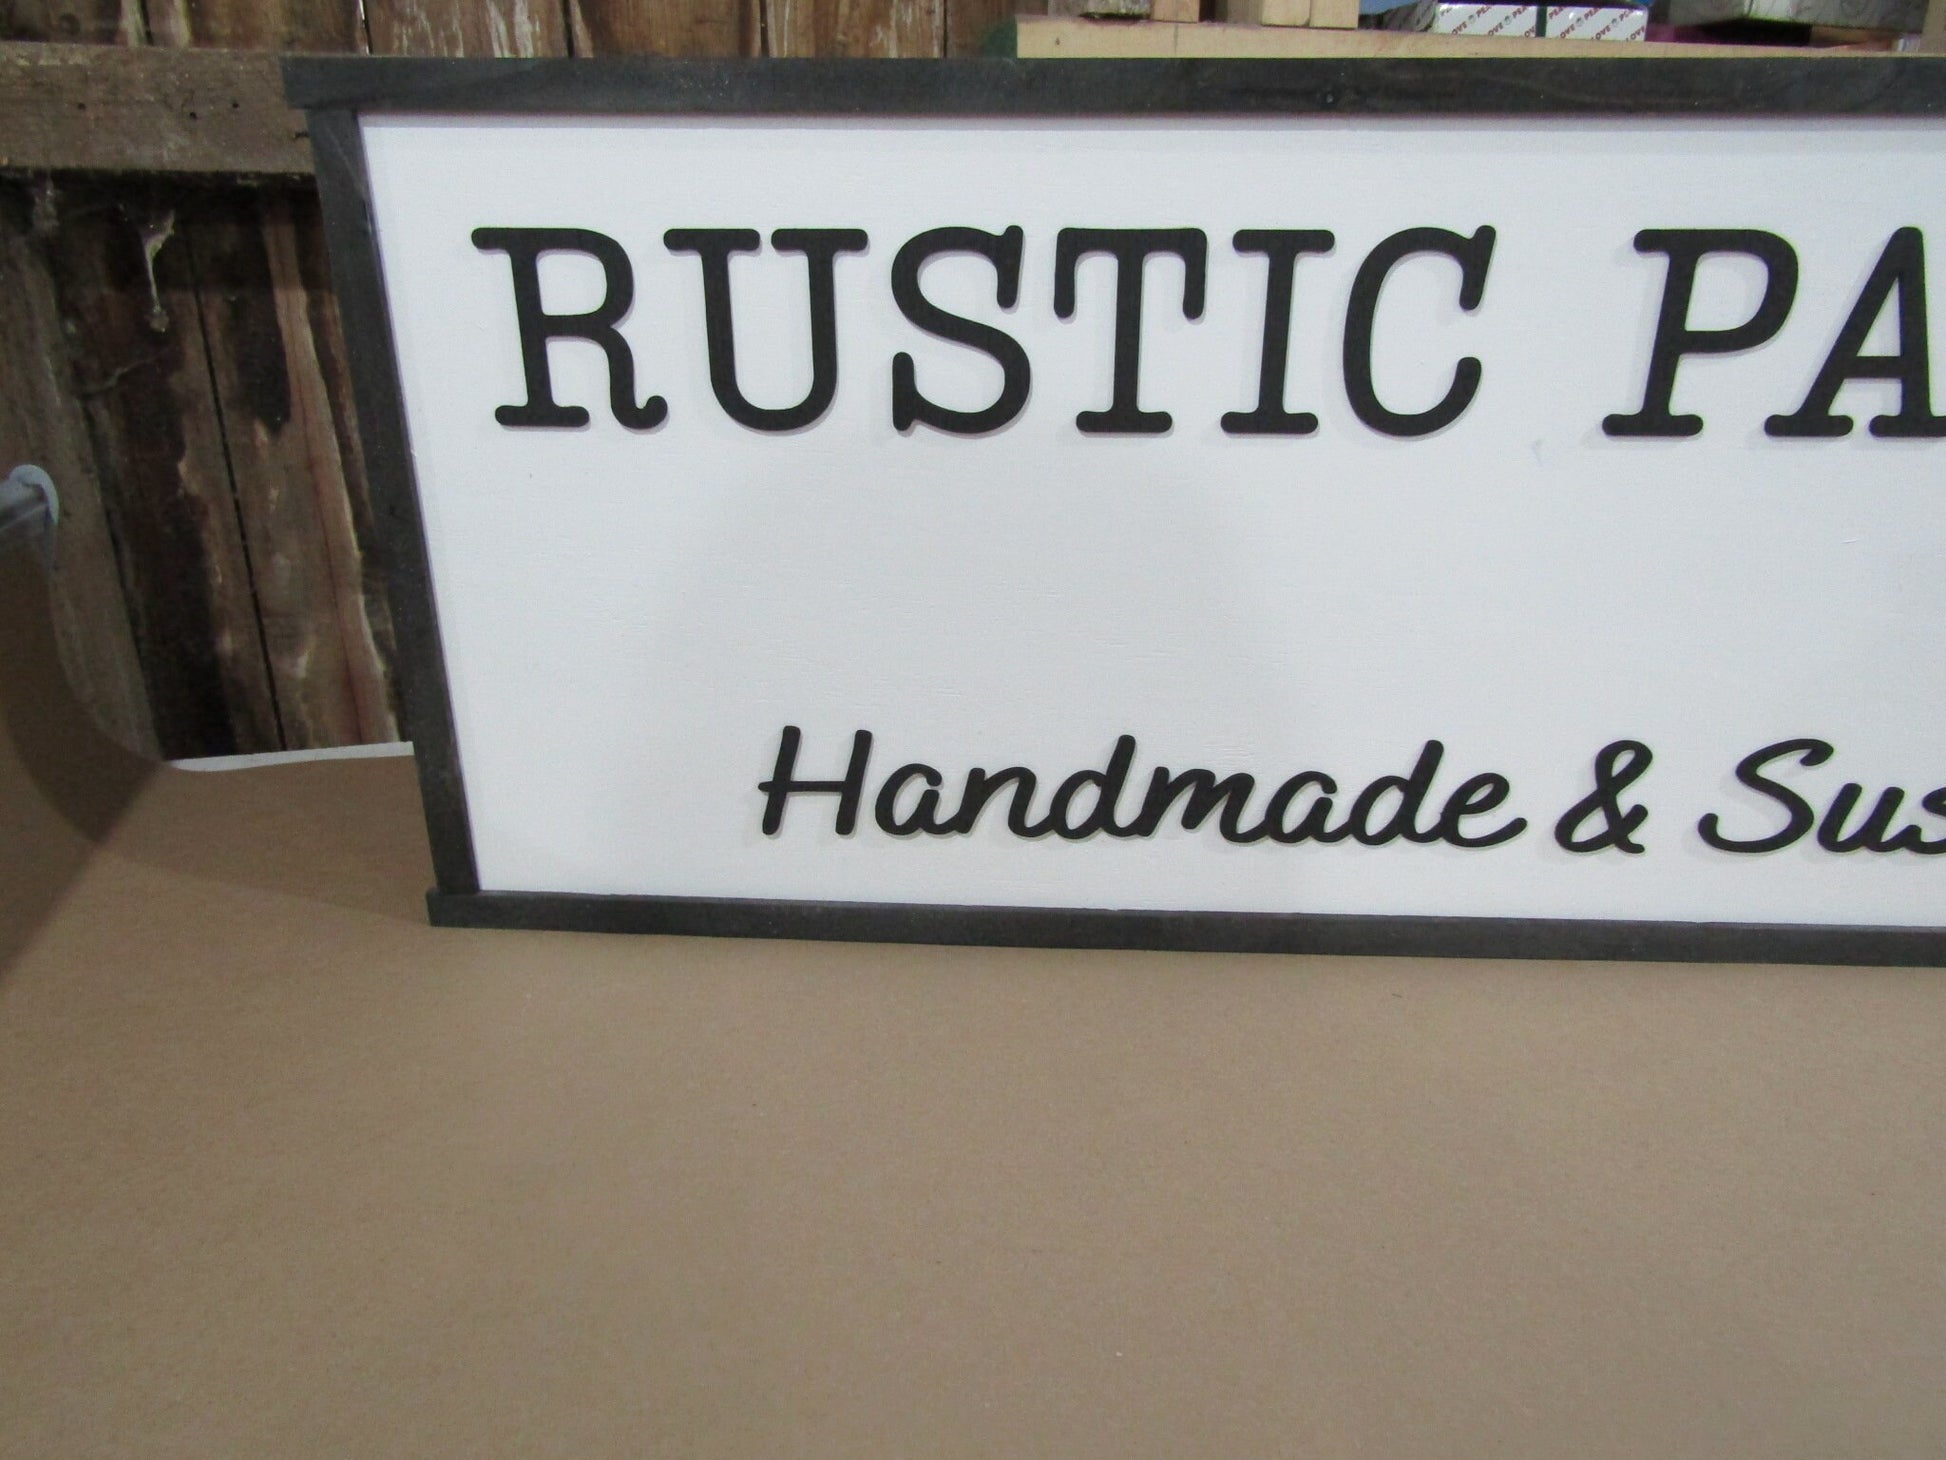 Custom Signage Business Commerical Signs Wooden Framed Handmade Made To Order Rustic Studio Store Front 3D Raised Text Wooden Sign Logo